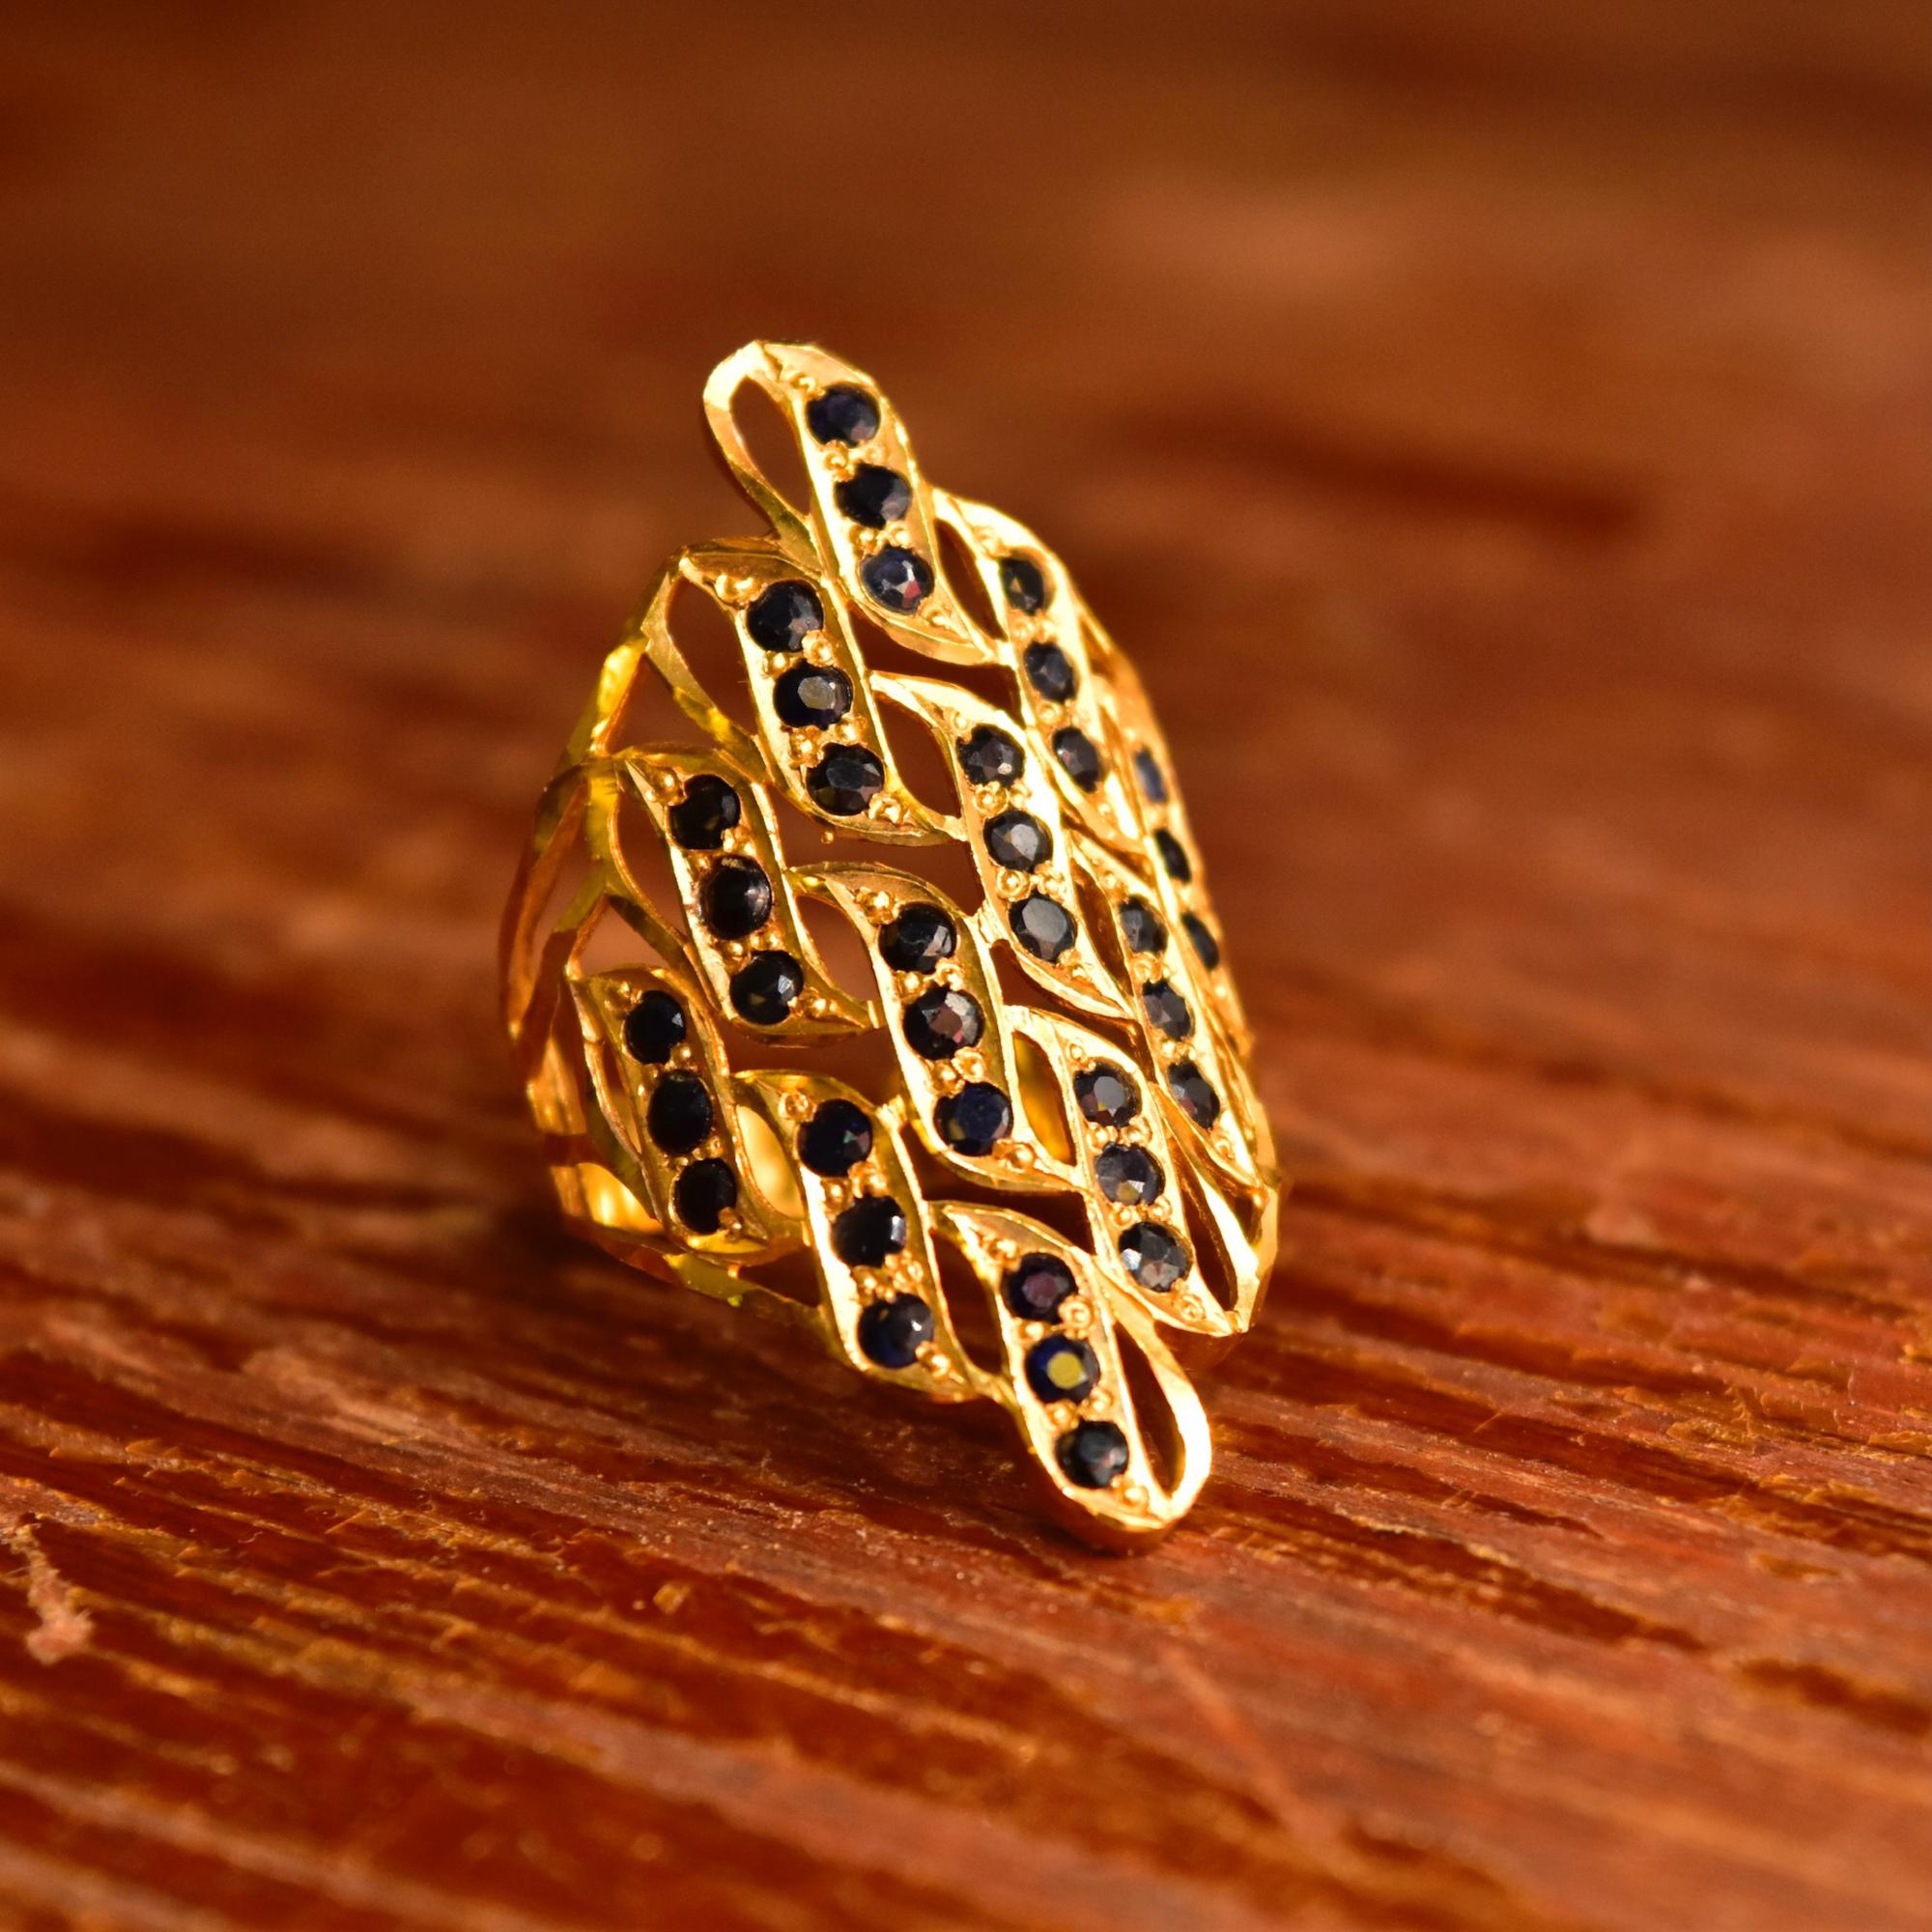 A stunning solid 22kt yellow gold shield ring with dazzling faceted black stone embellishments. This ring is the definition of a statement piece and somehow gets more beautiful the longer your look at it. Featuring a long yellow gold ring face